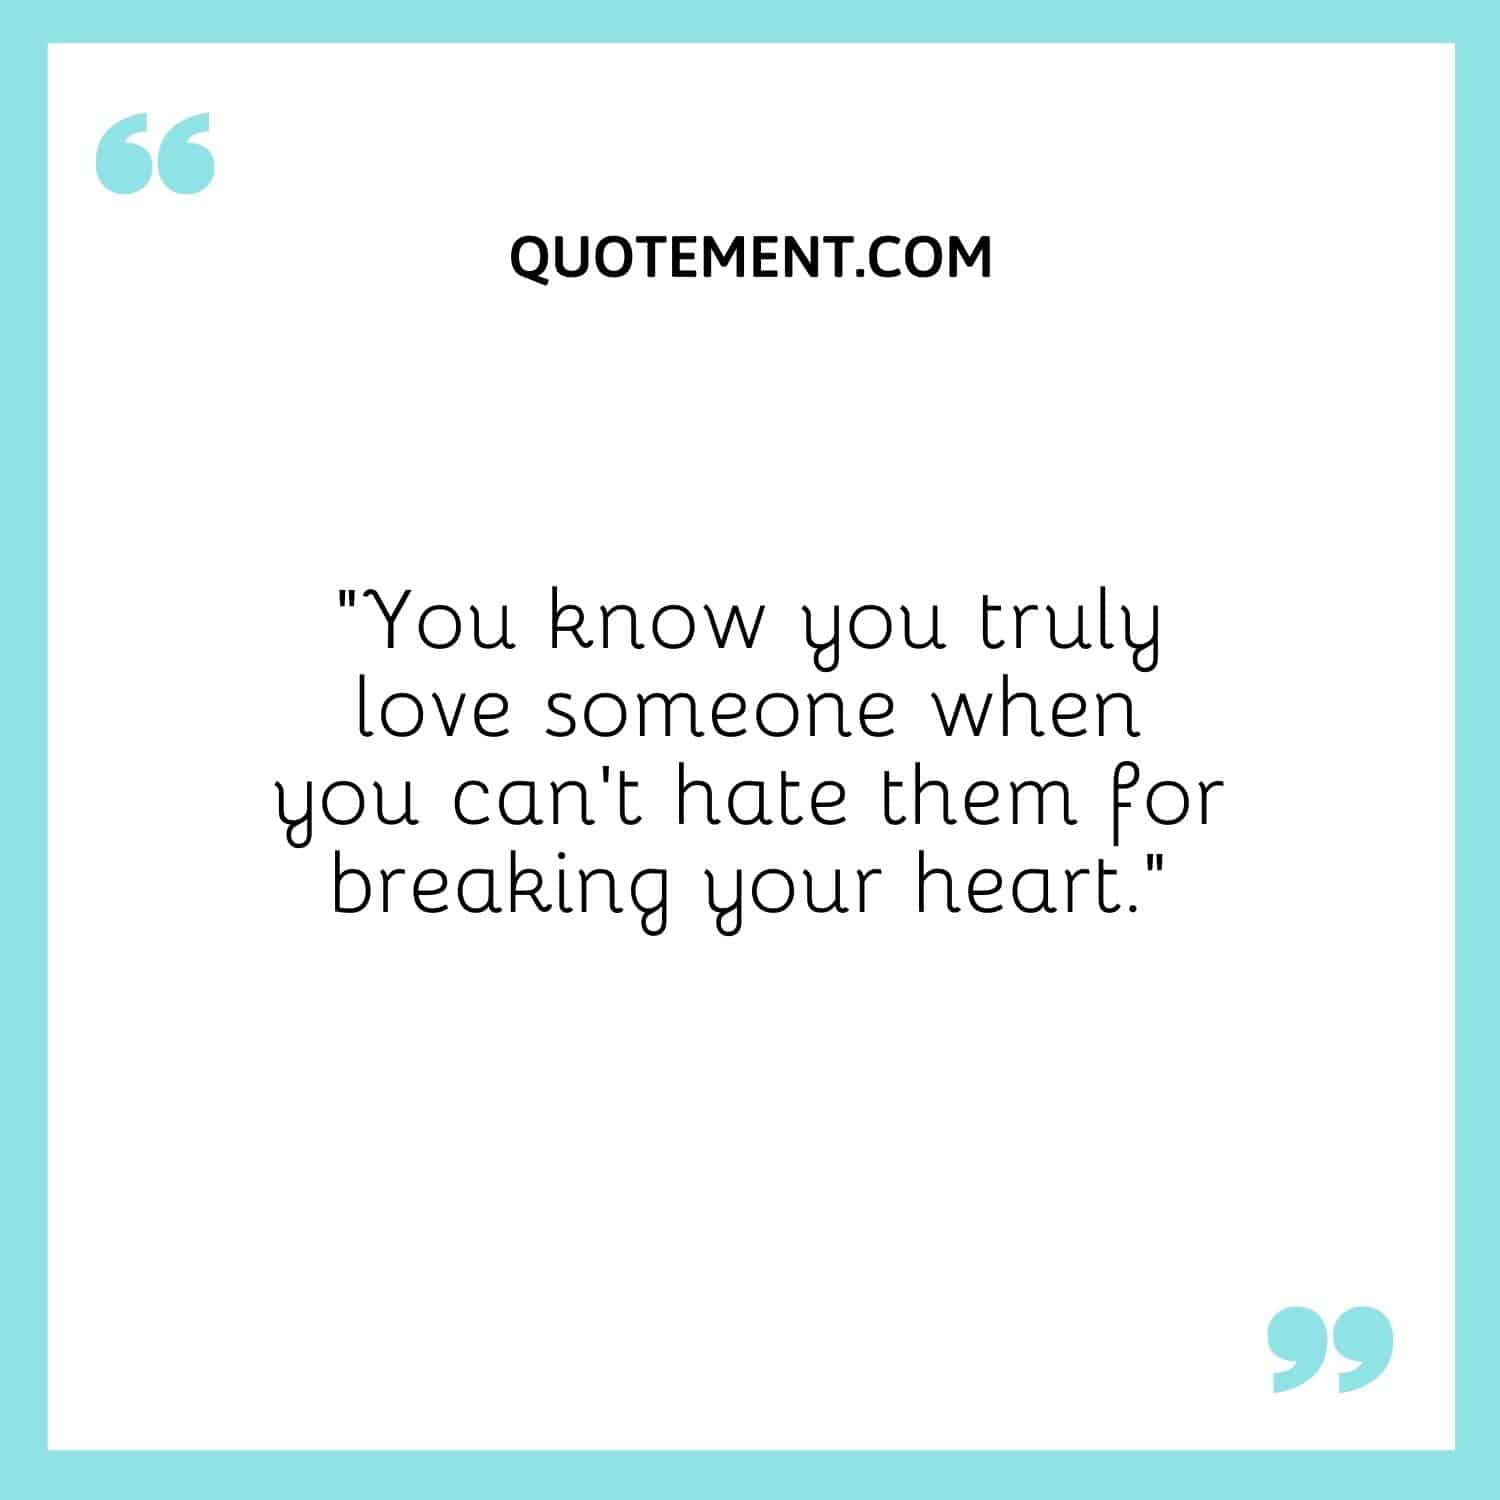 You know you truly love someone when you can't hate them for breaking your heart.